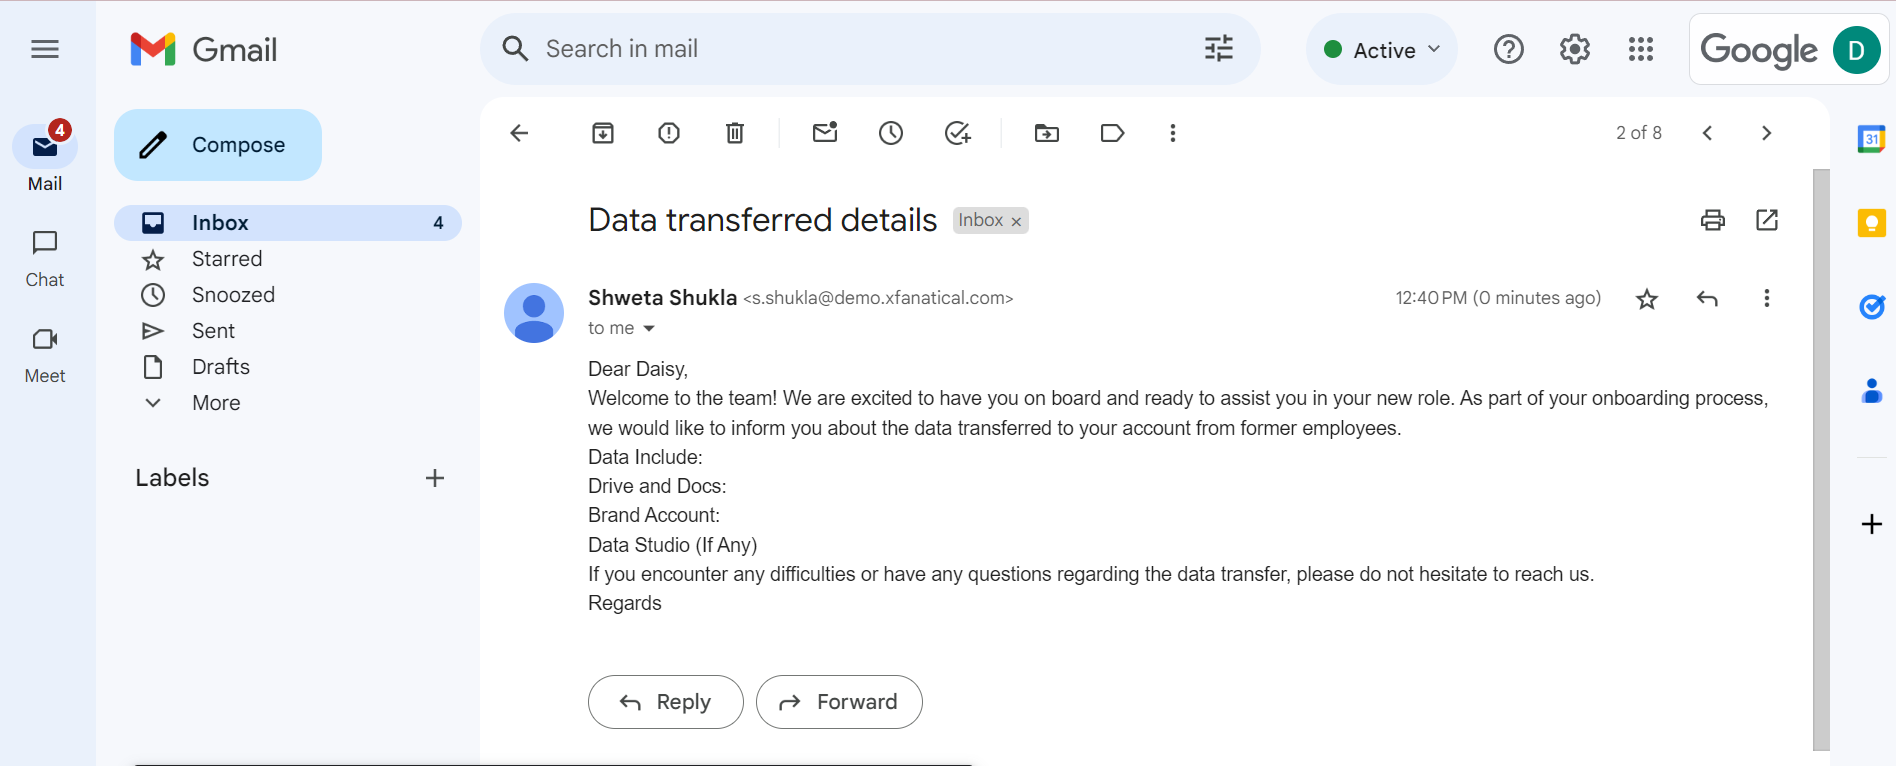 New employee received an email confirming the data handover